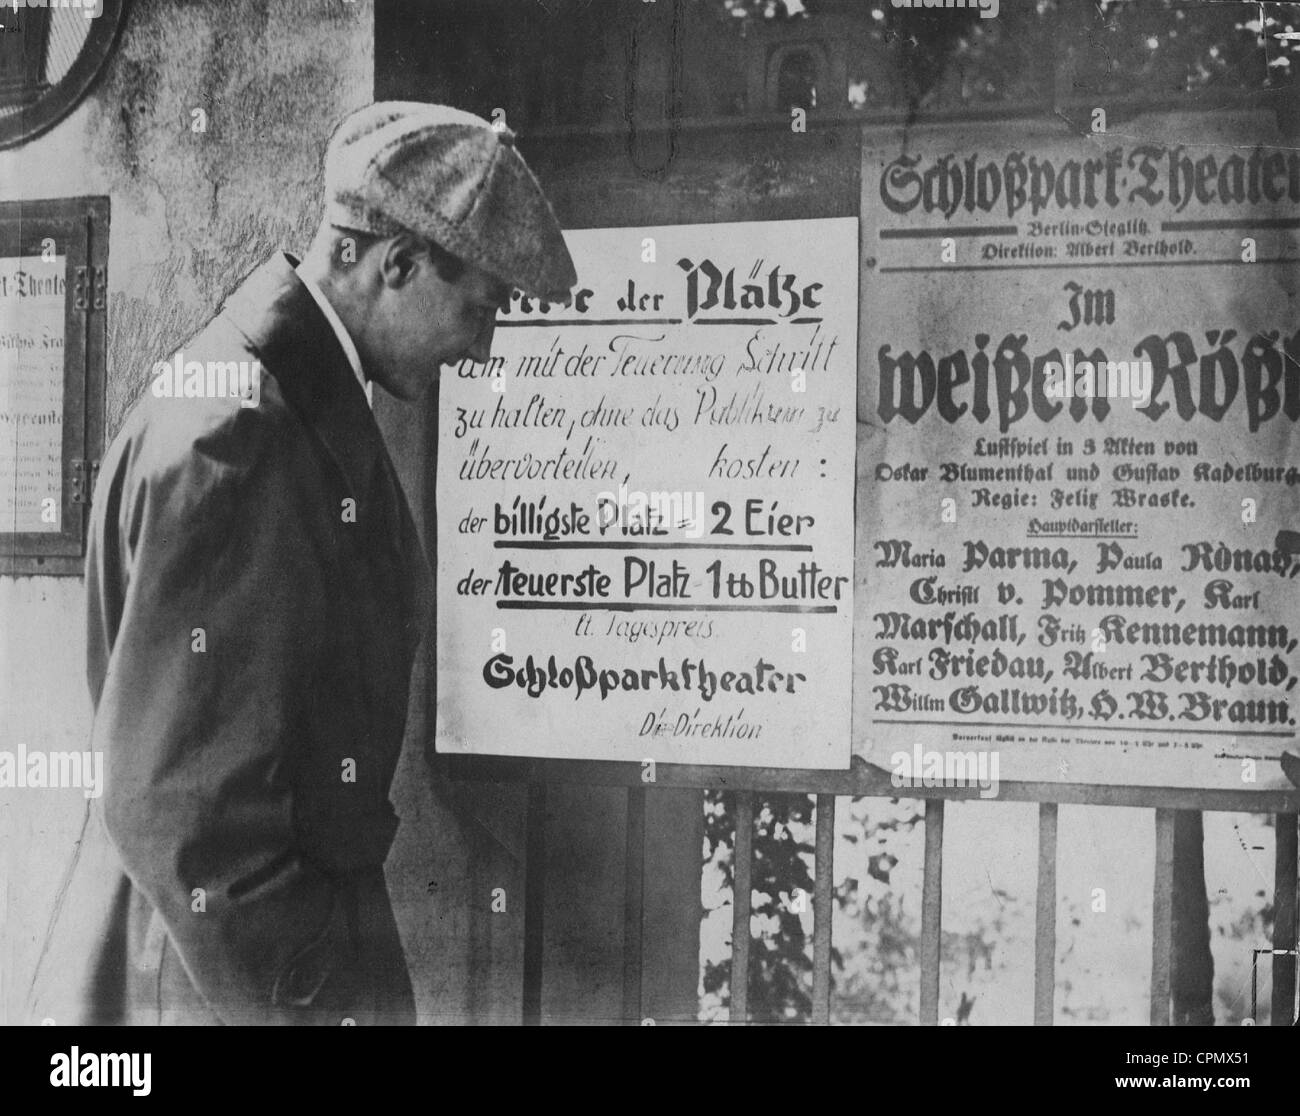 A Man standing in front of Berlin's Schlossparktheater reading about ticket prices, Berlin Steglitz, 1923 (b/w photo) Stock Photo